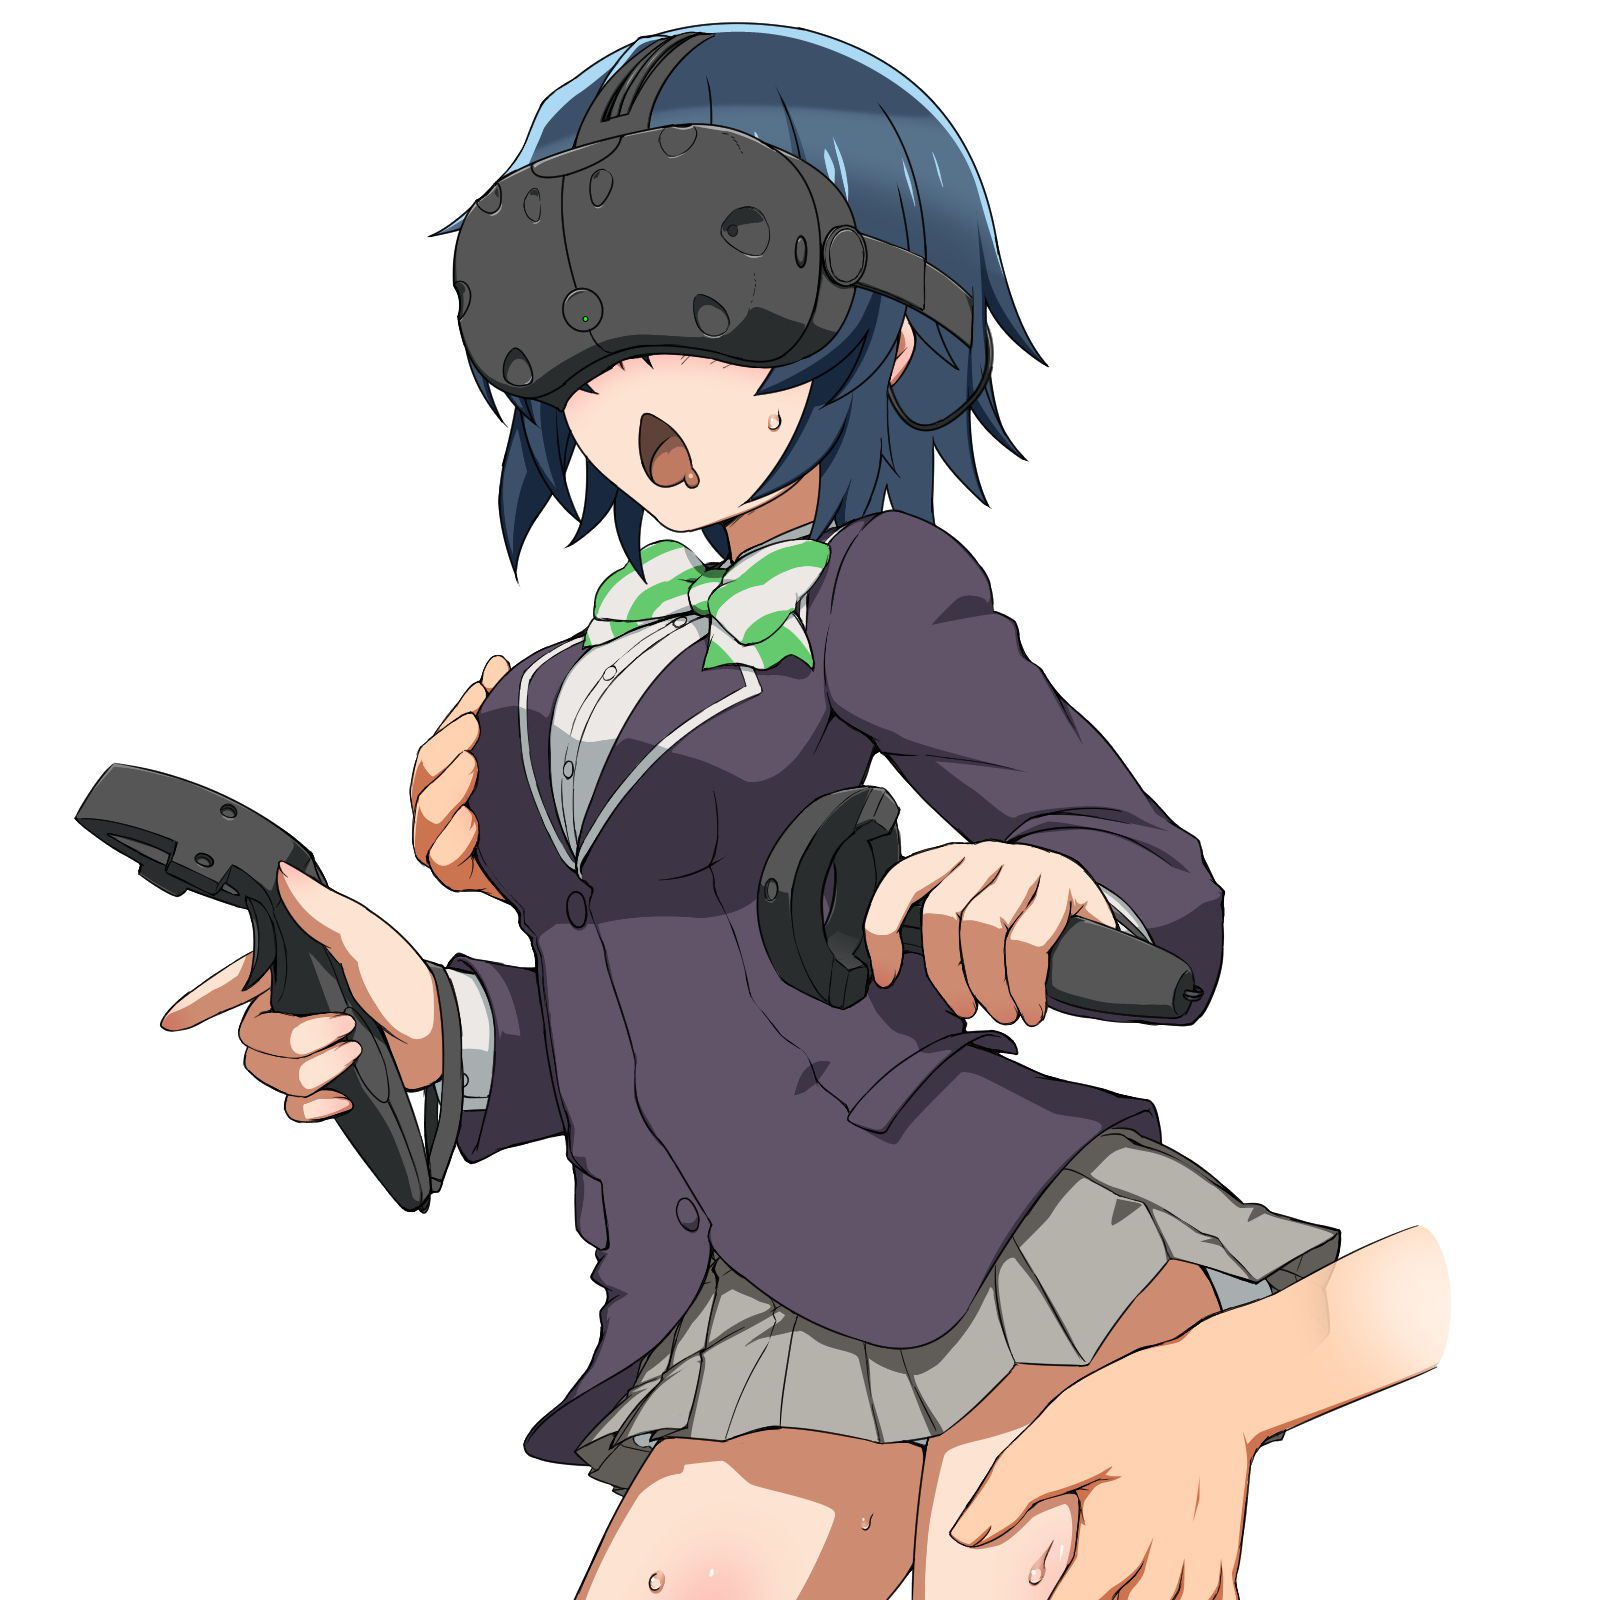 Secondary fetish image of VR character. 14